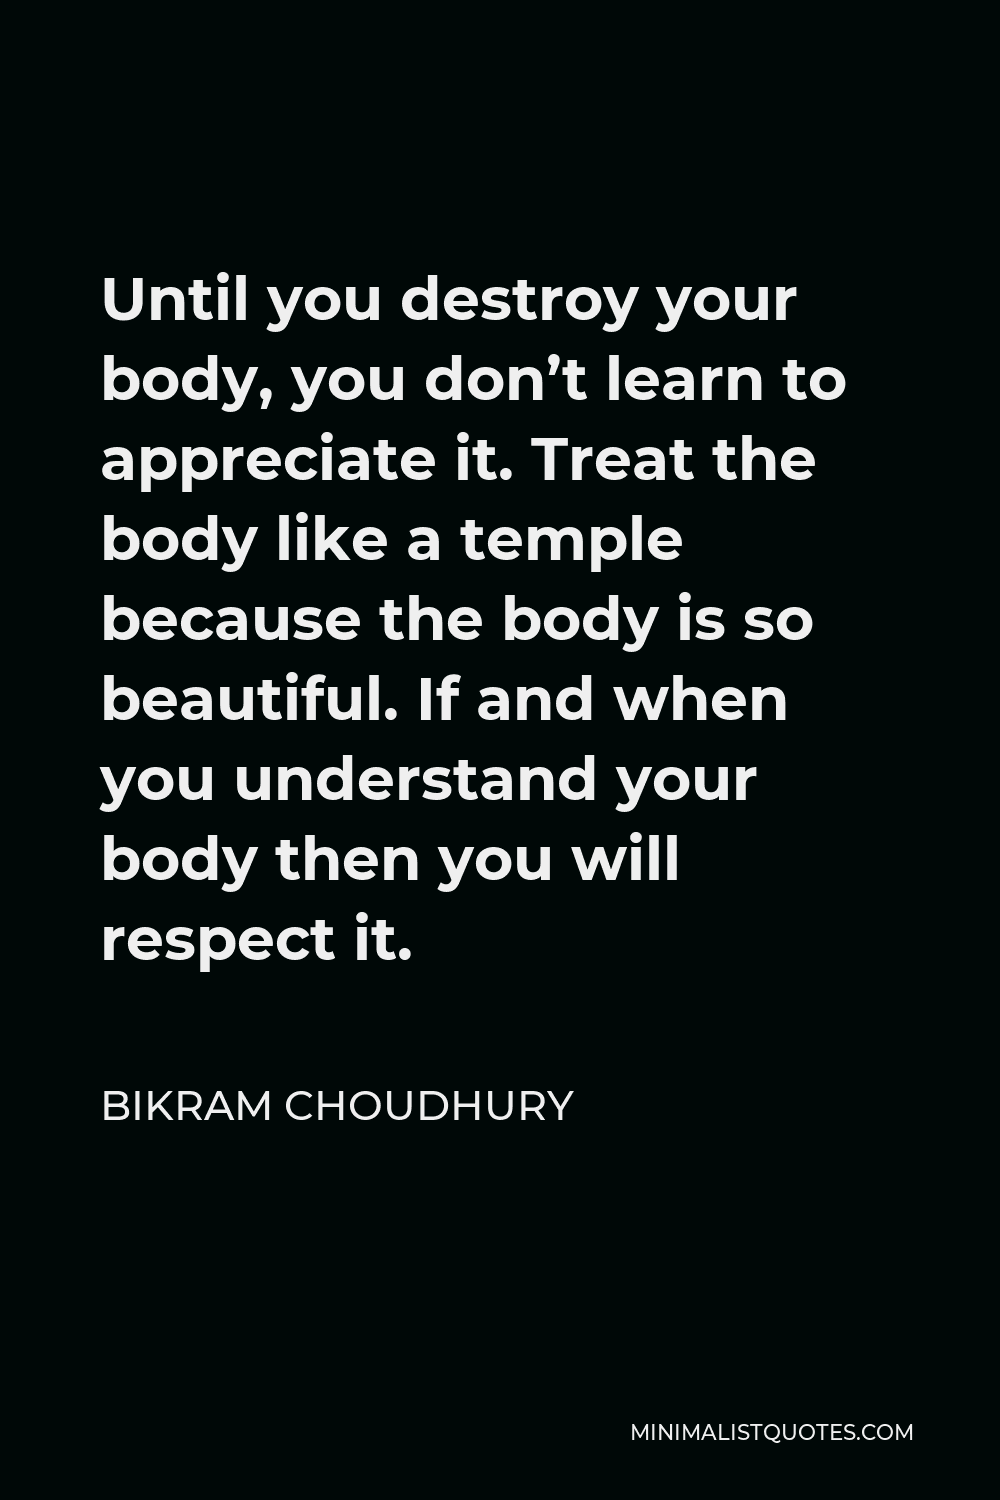 Bikram Choudhury Quote - Until you destroy your body, you don’t learn to appreciate it. Treat the body like a temple because the body is so beautiful. If and when you understand your body then you will respect it.